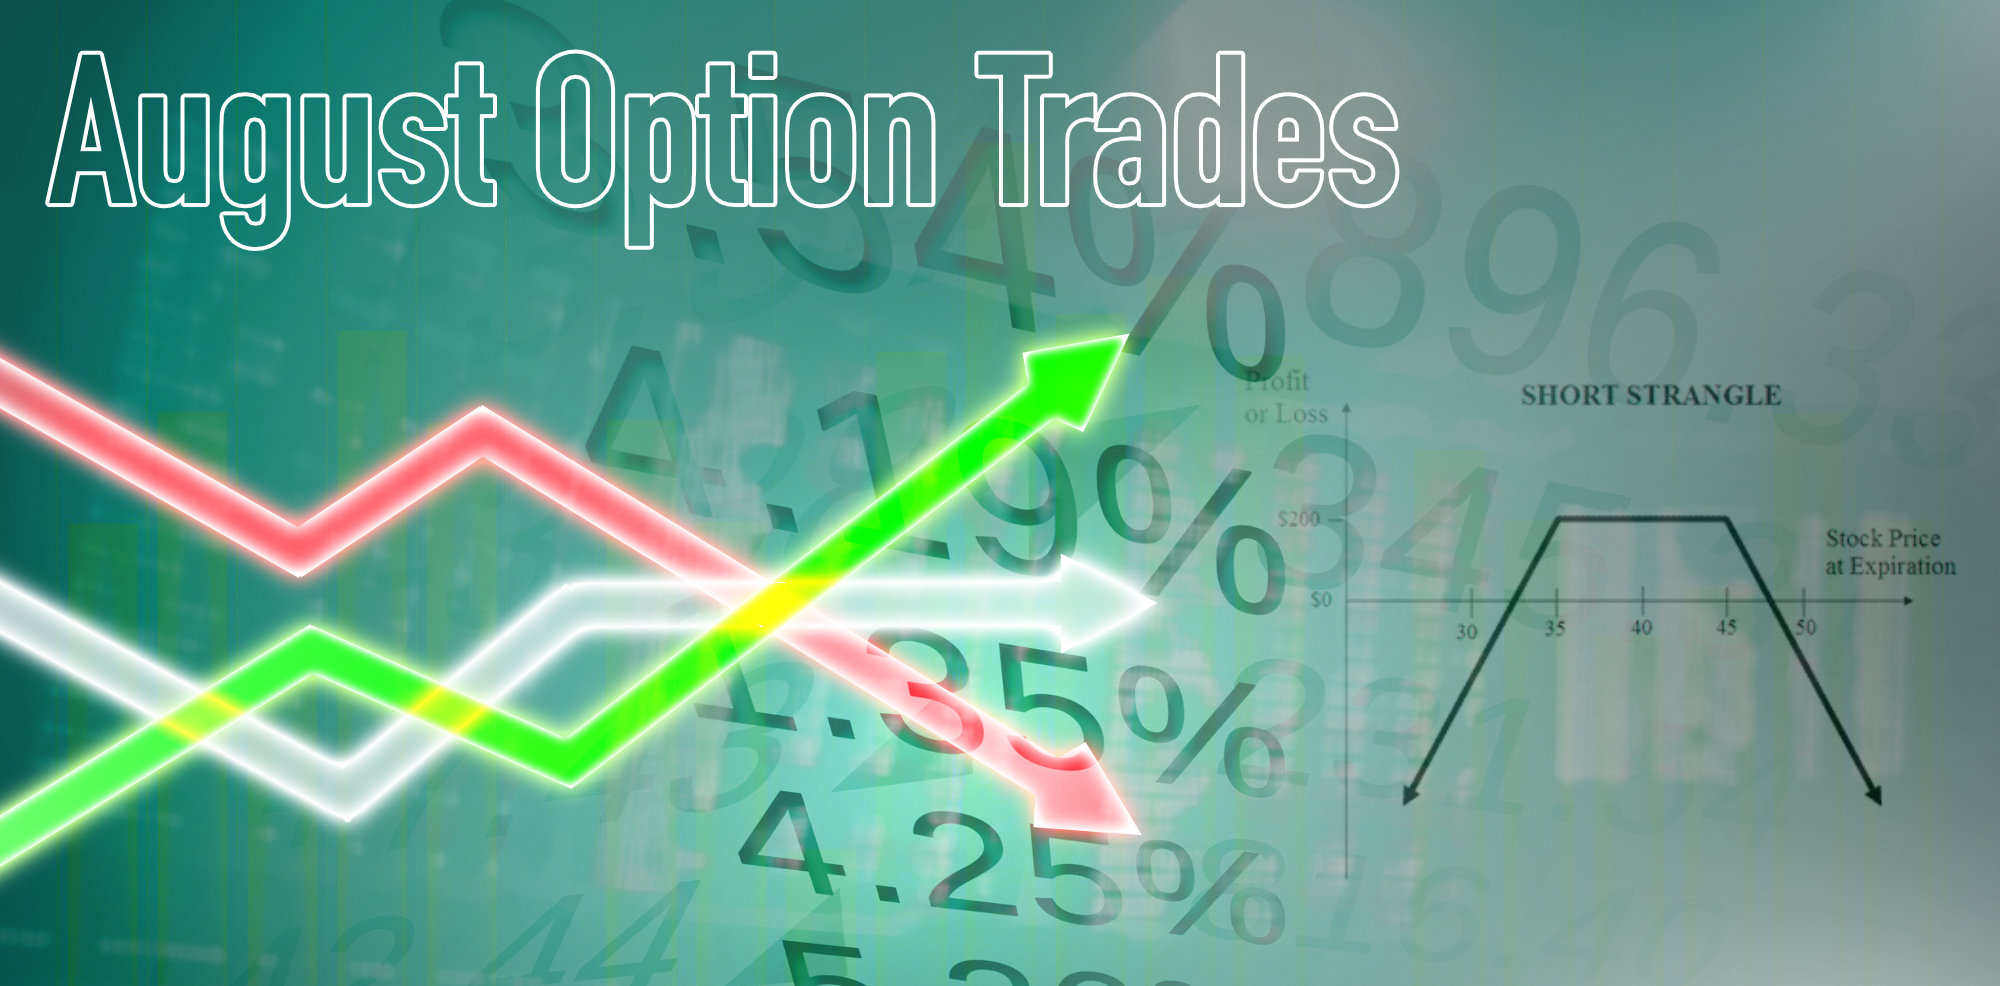 August 2016 Option Trades